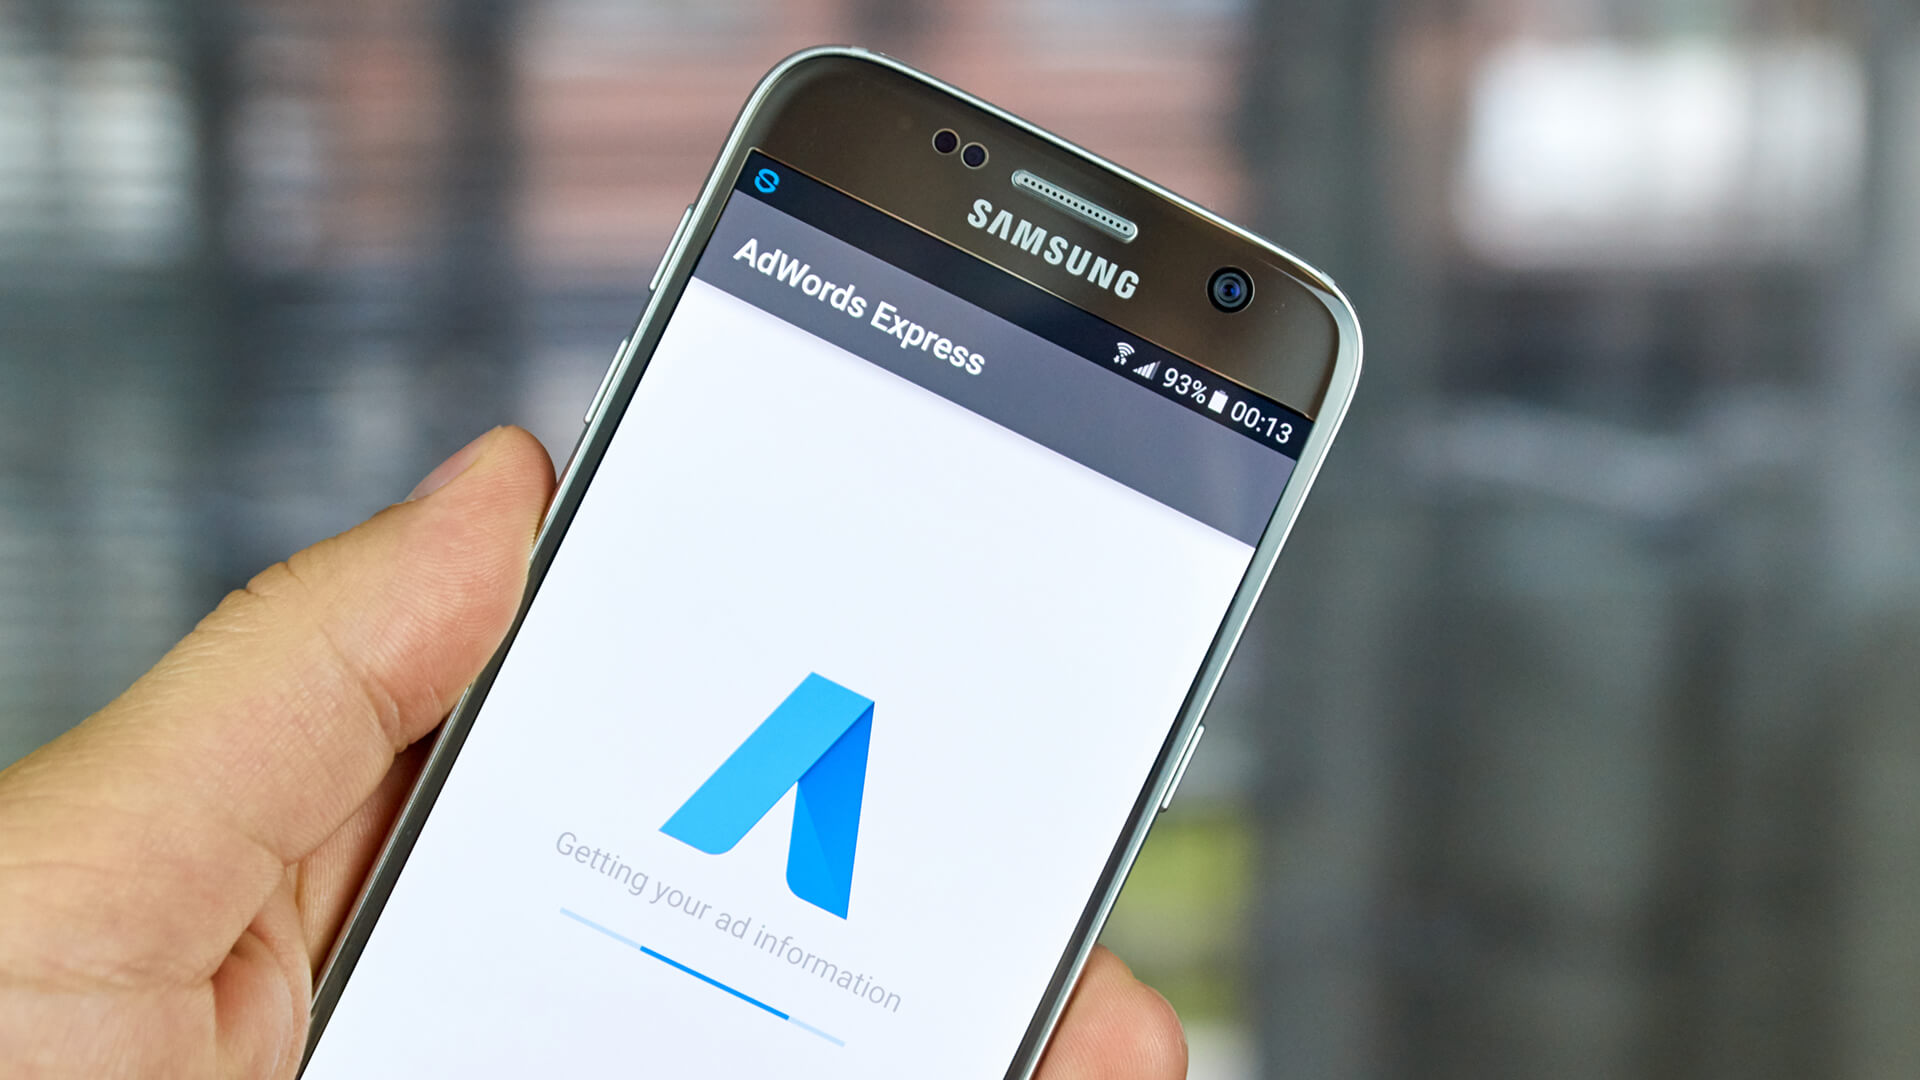 google-adwords-express-app-mobile-android1-ss-1920